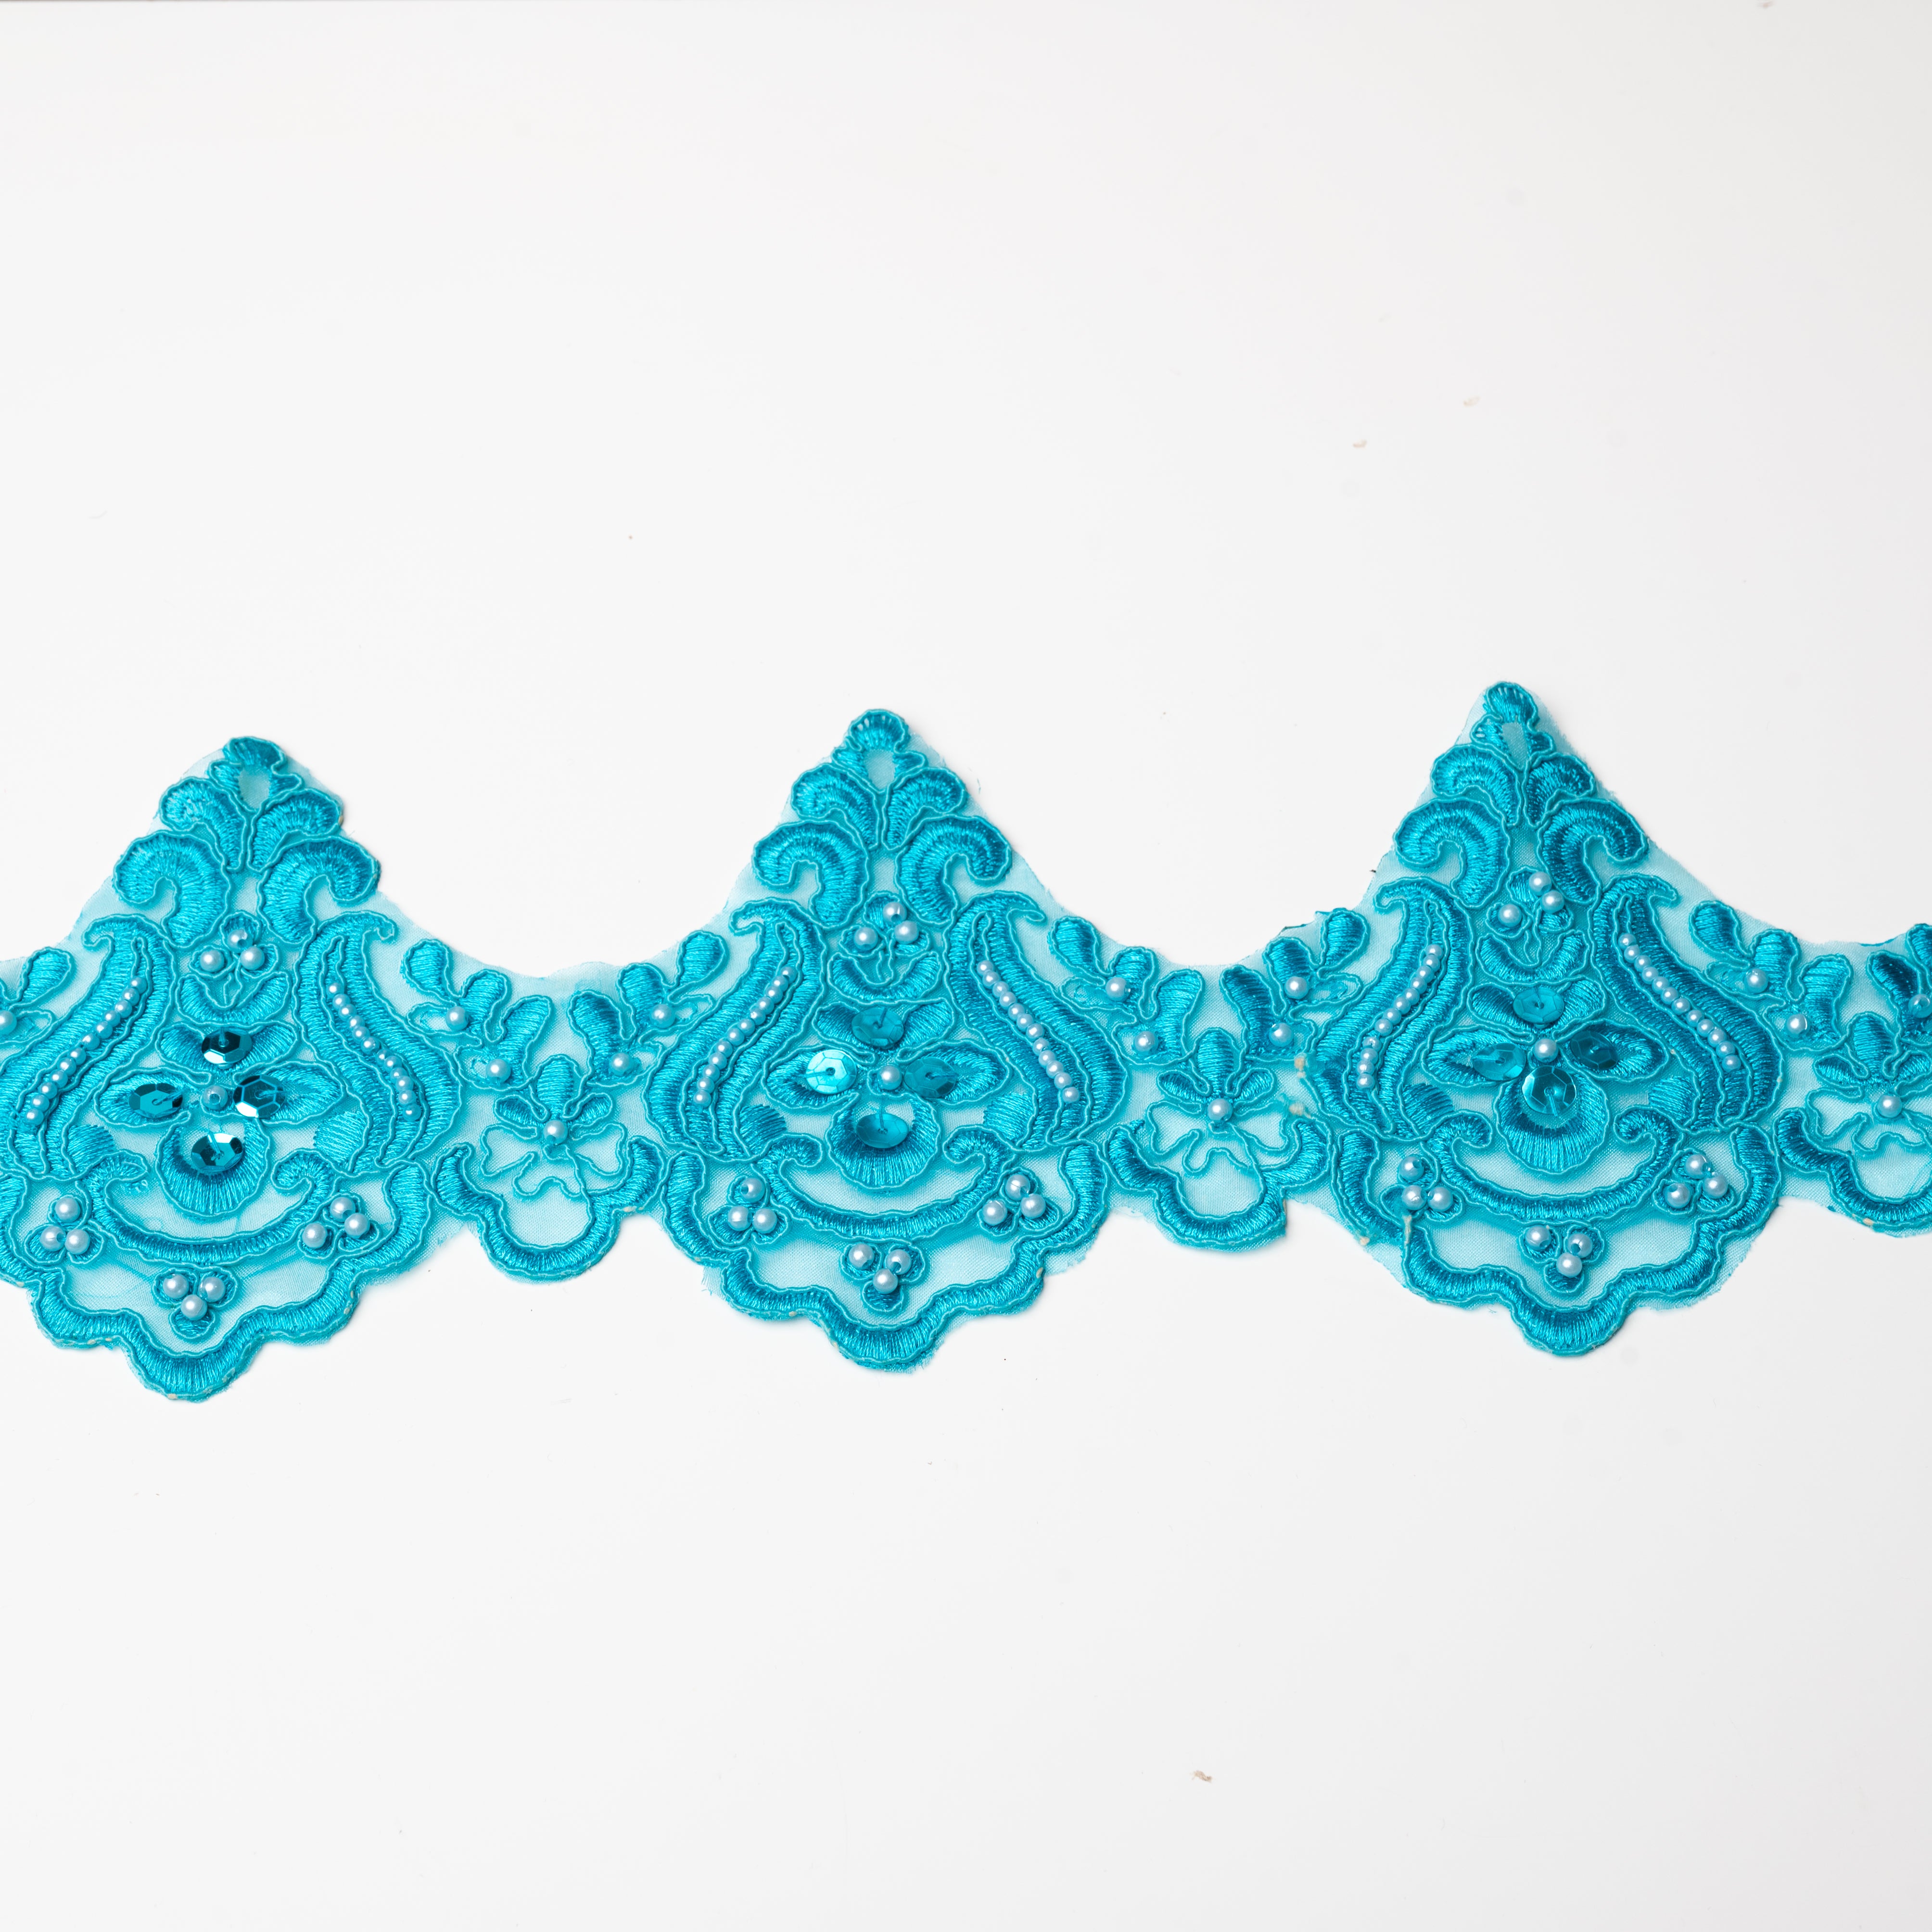 Turquoise blue scalloped lace embroidered onto an organza backing and embellished with pearls and sequins.  The lace is laying flat on a white background.